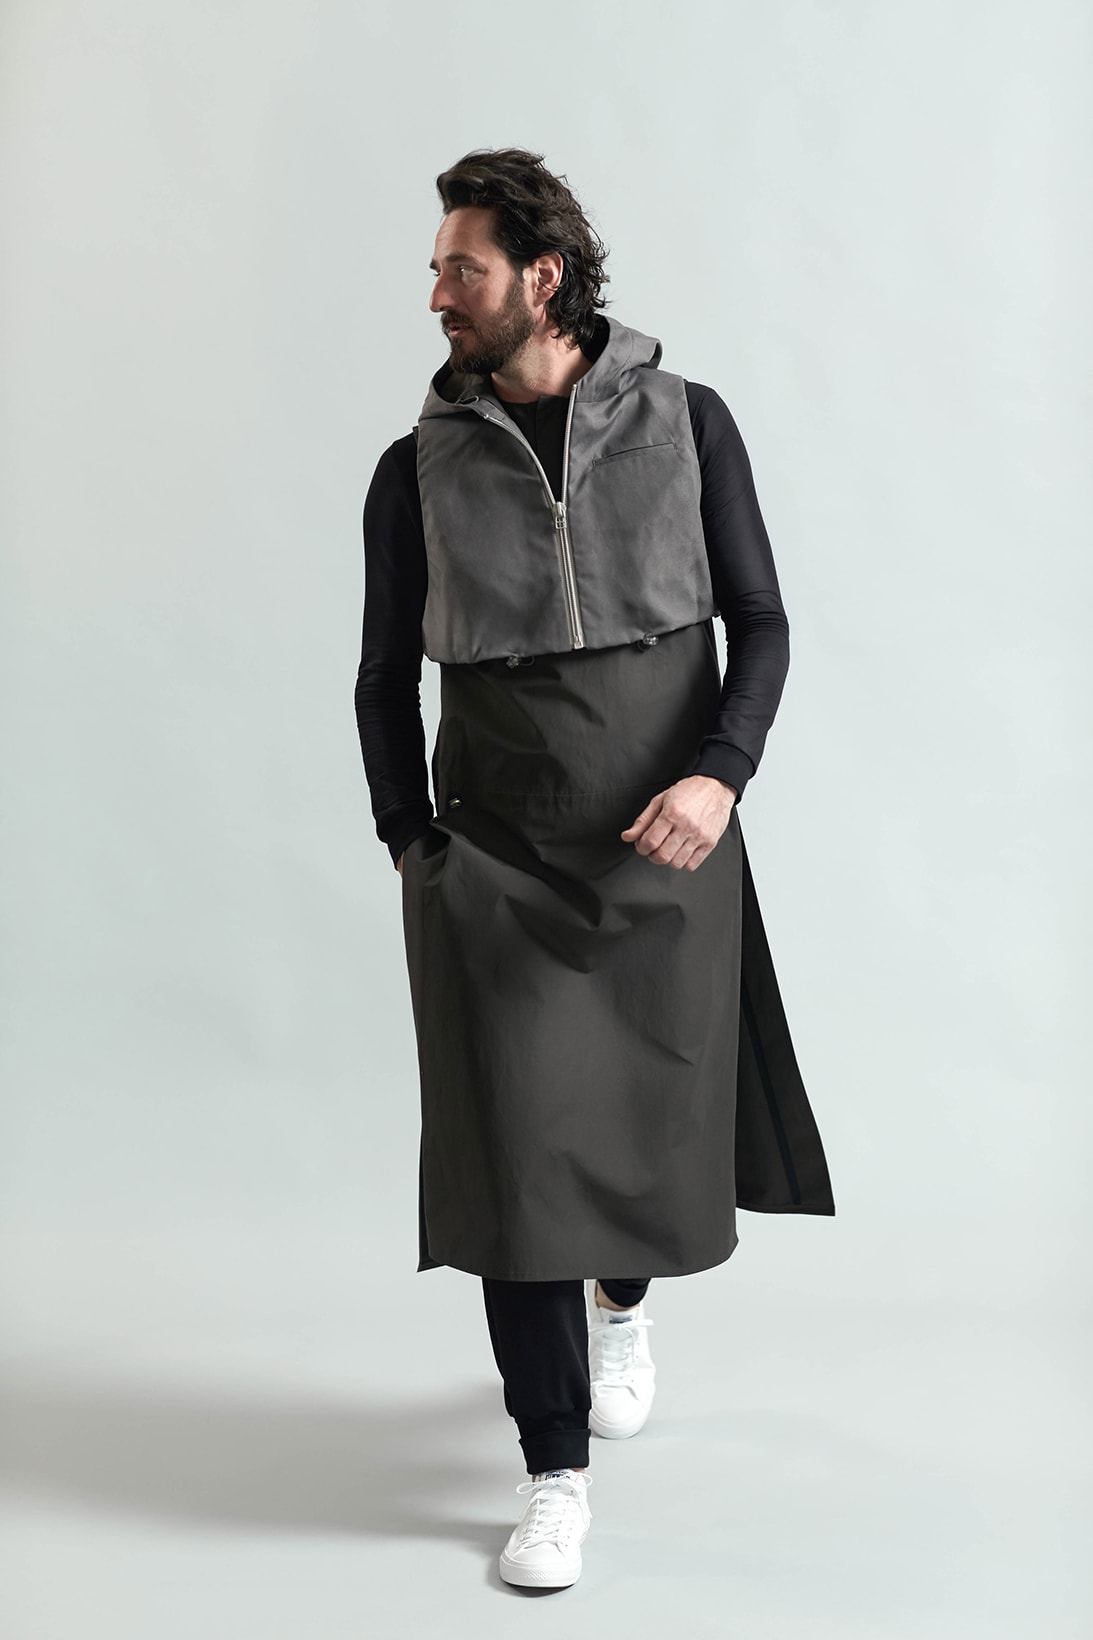 ByBorre Collaboration With the Dominican Order of Preachers Collection Friar's Habit